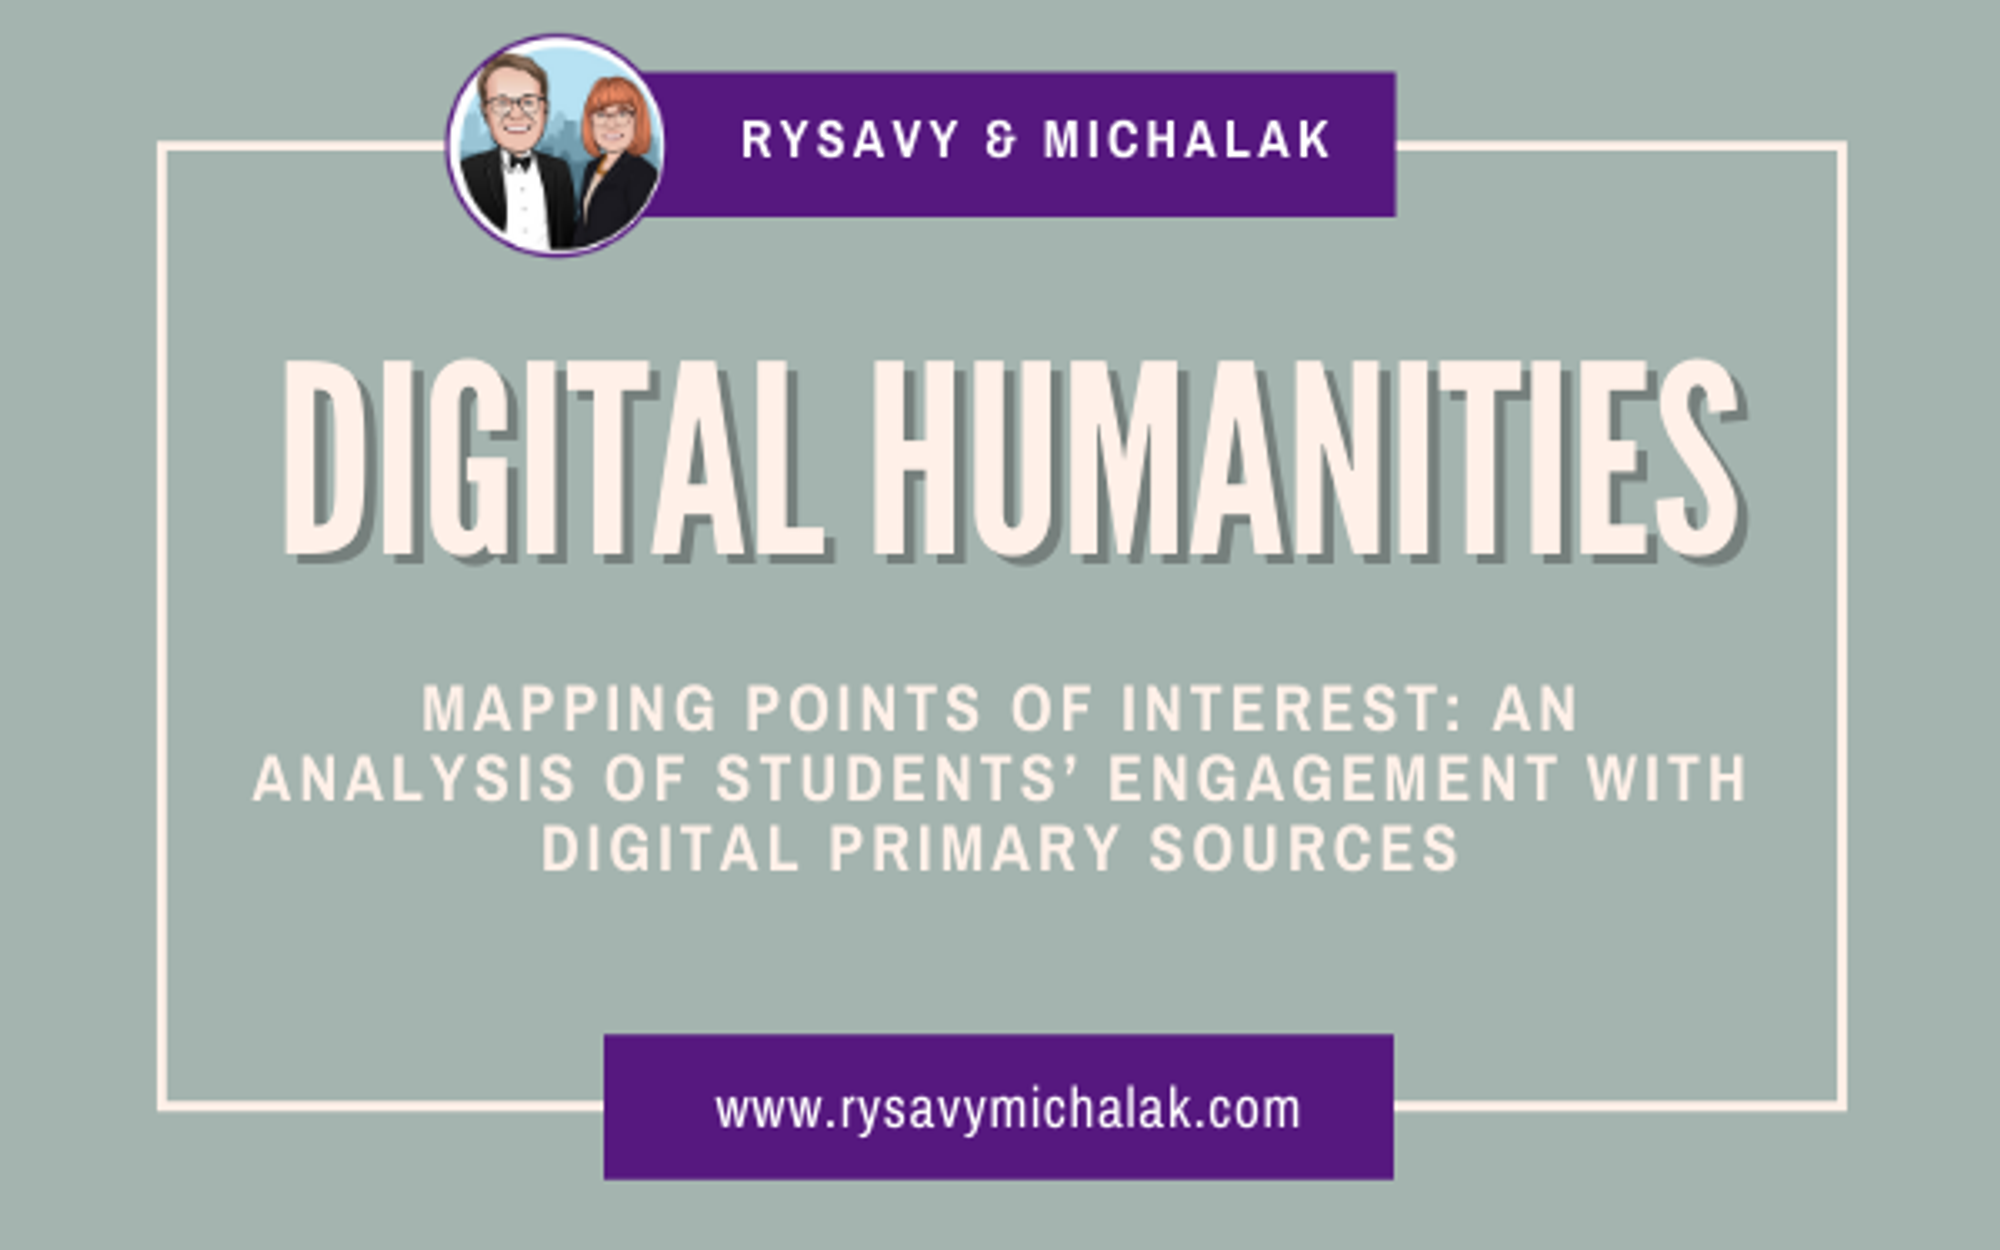 Mapping points of interest: an analysis of studentsâ€™ engagement with digital primary sources